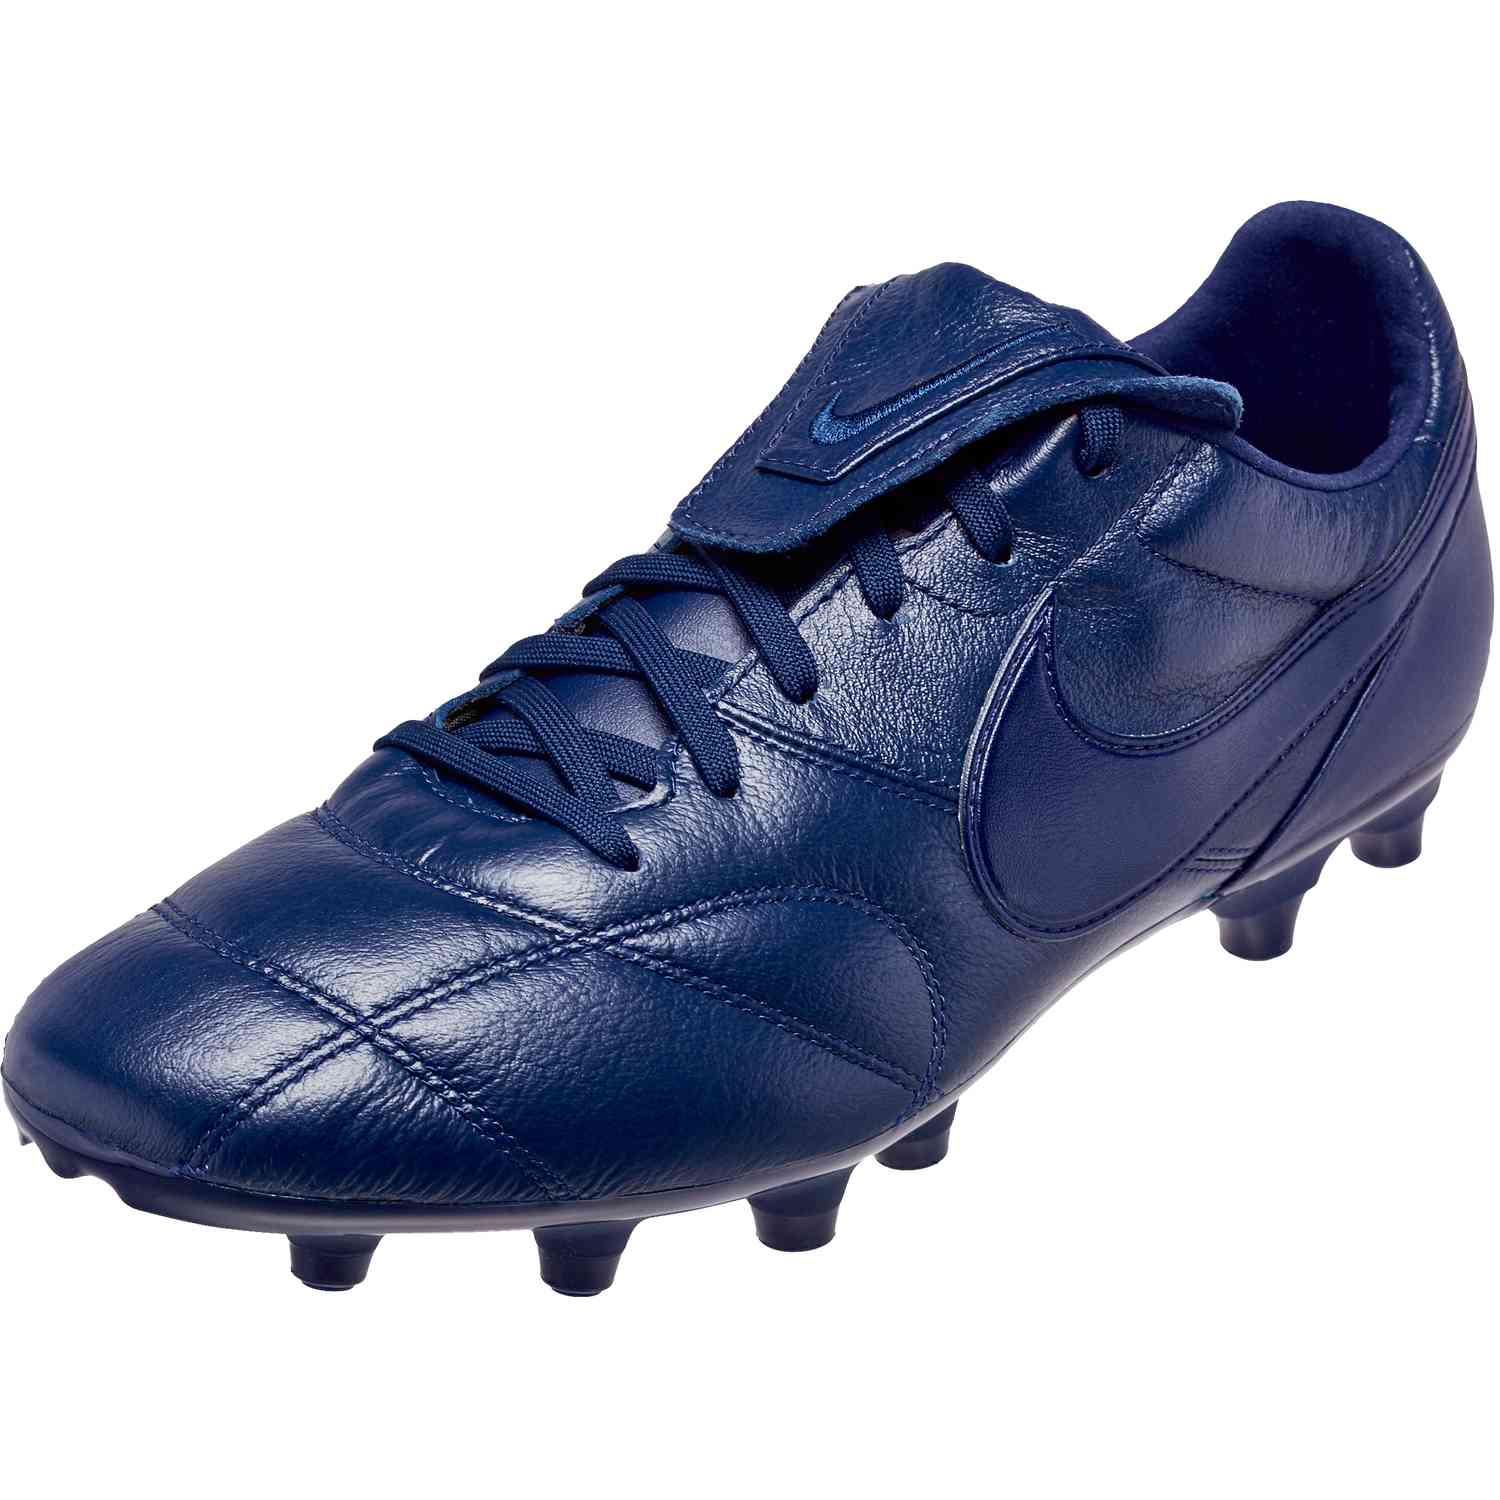 navy blue nike soccer cleats